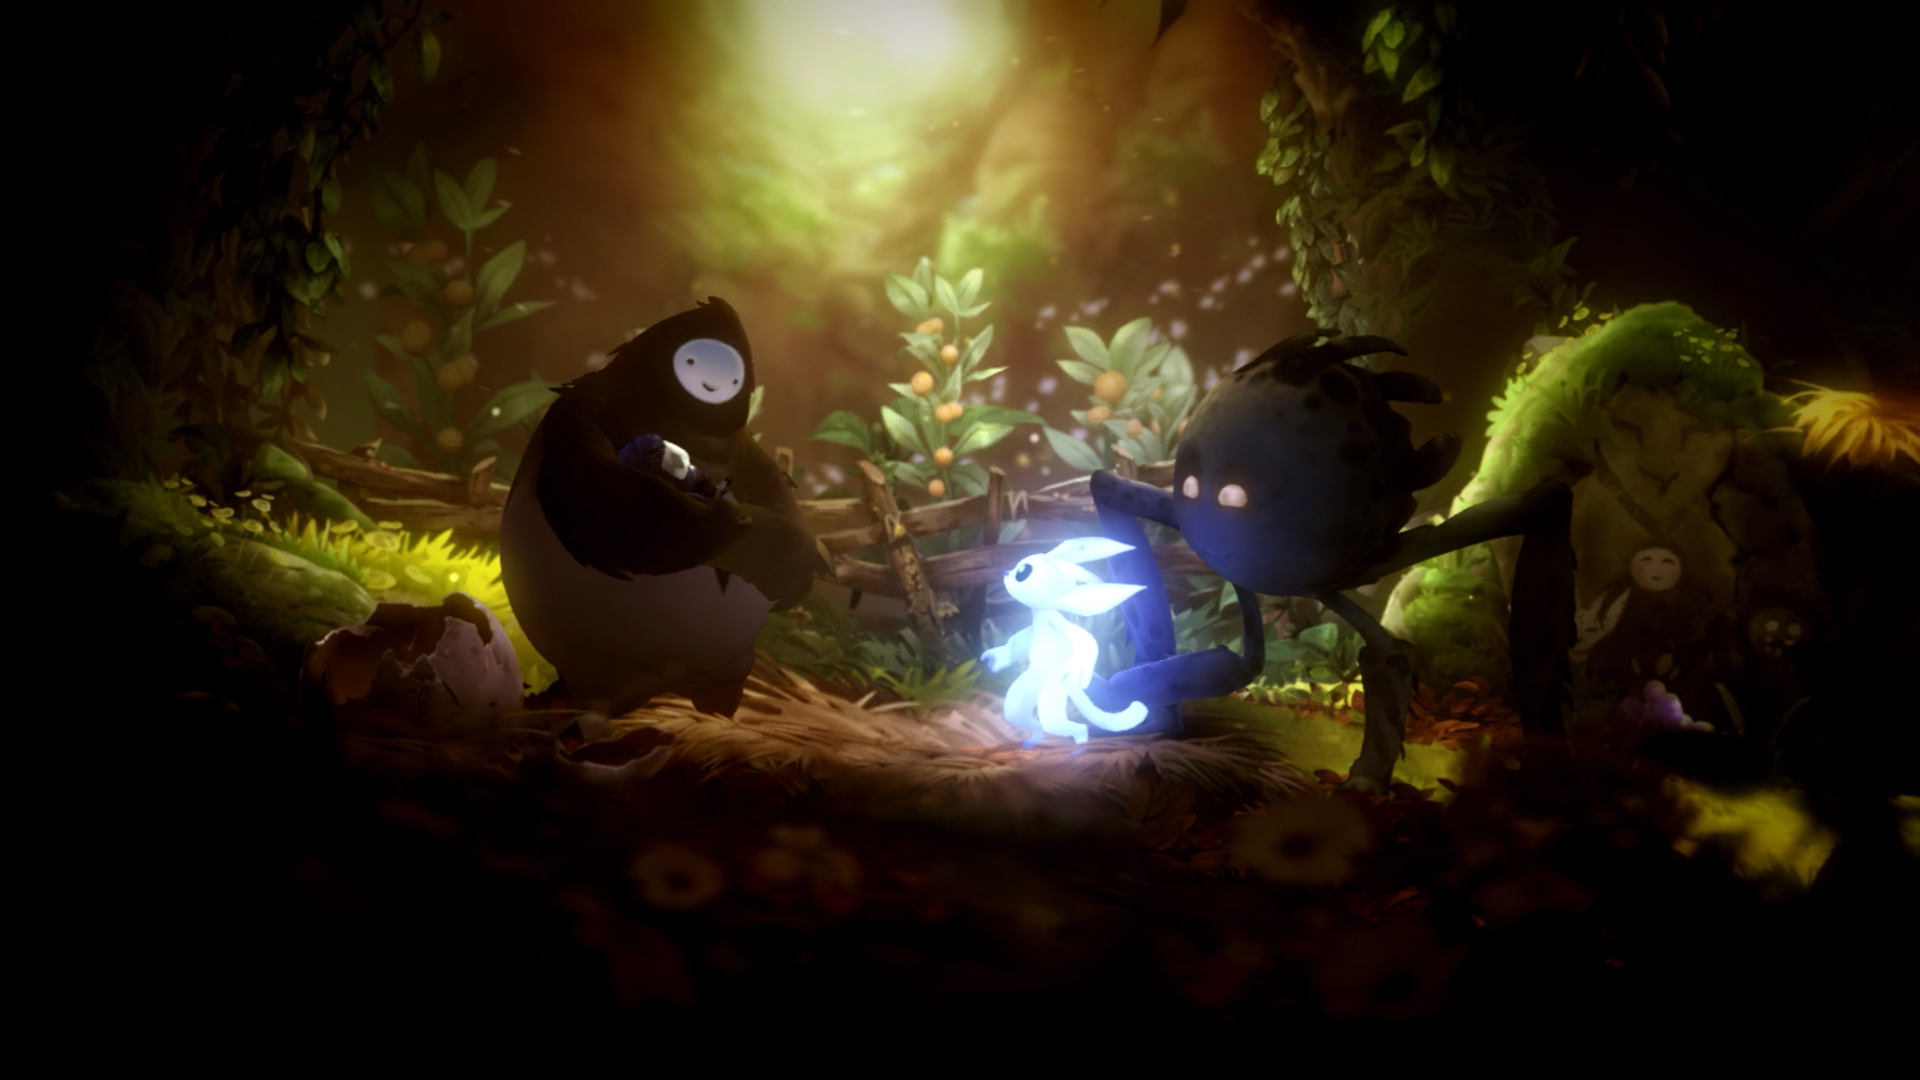 the art of ori and the will of the wisps